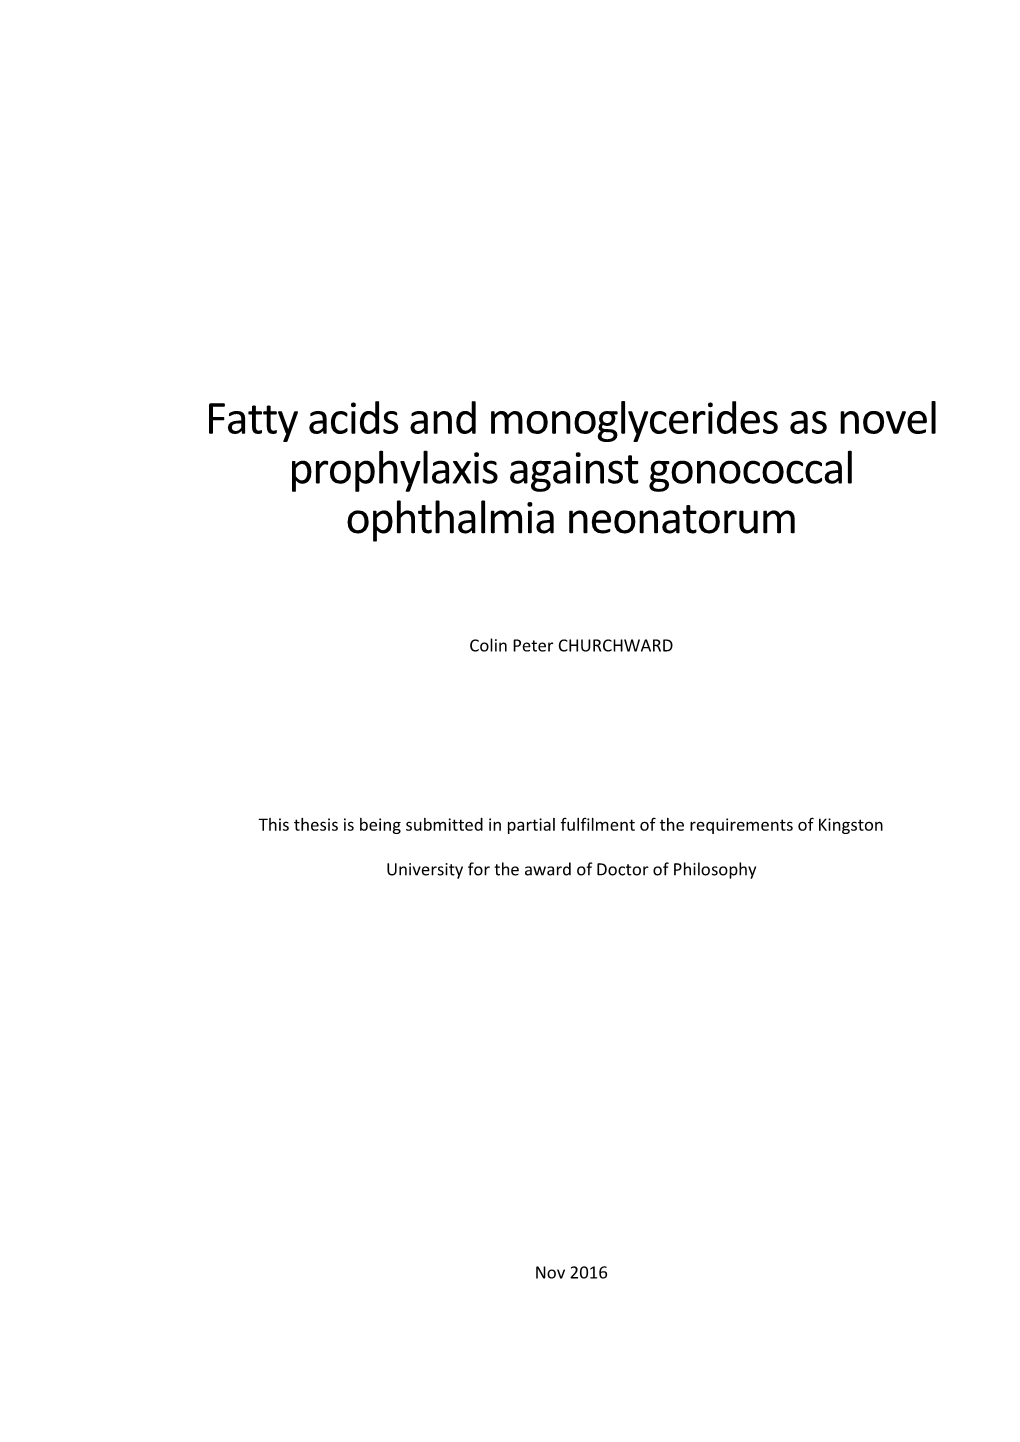 Fatty Acids and Monoglycerides As Novel Prophylaxis Against Gonococcal Ophthalmia Neonatorum